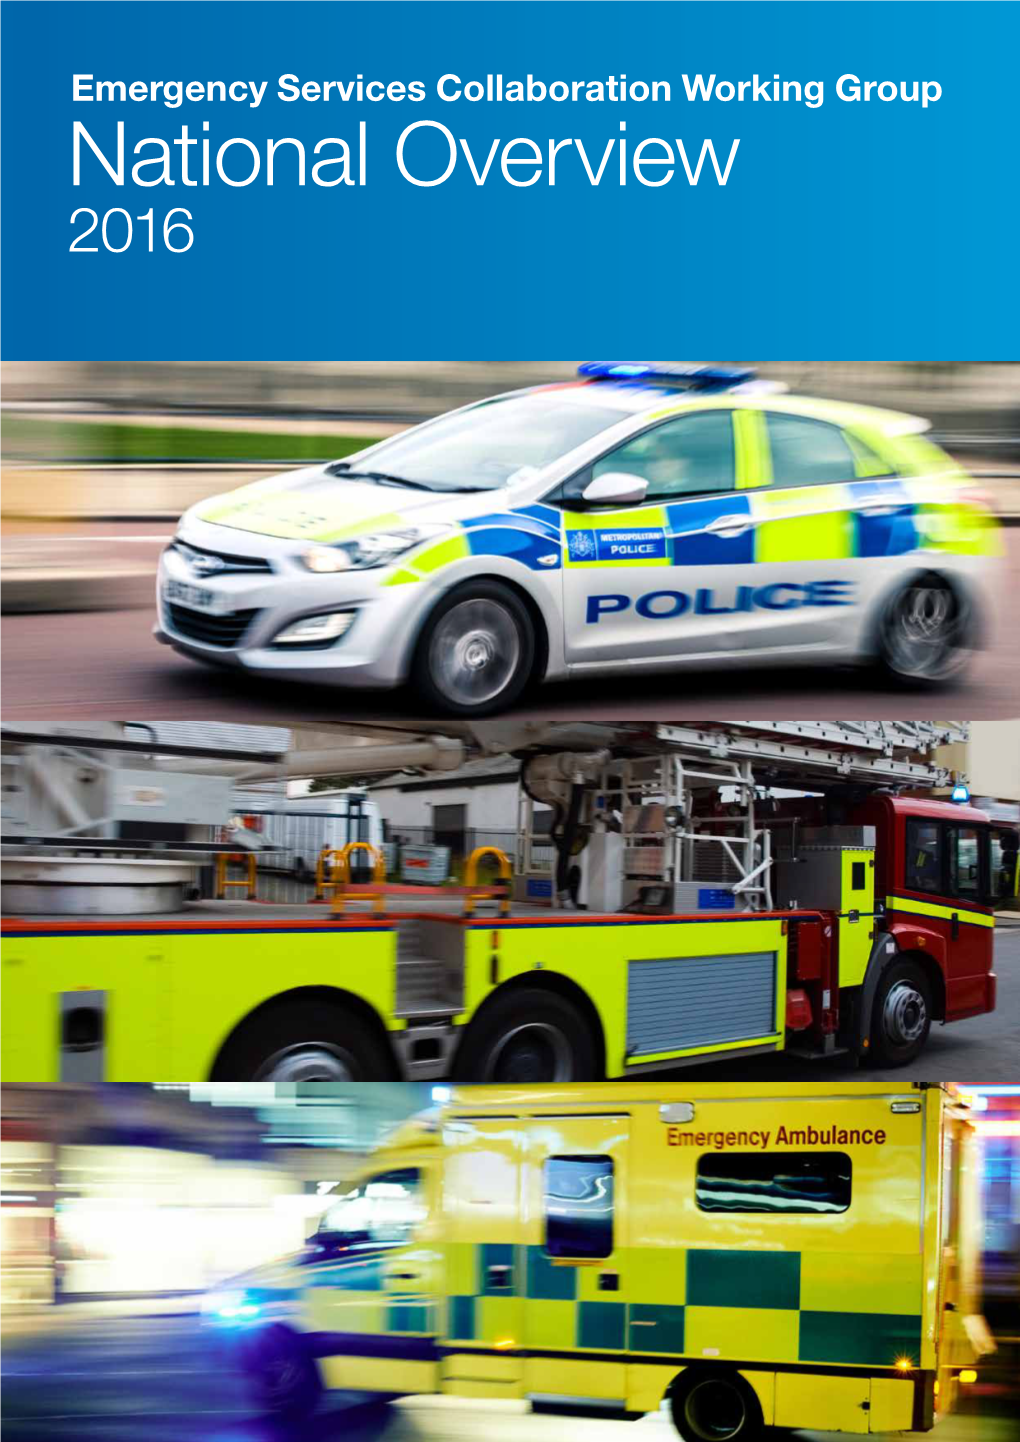 Emergency Services Collaboration Working Group National Overview 2016